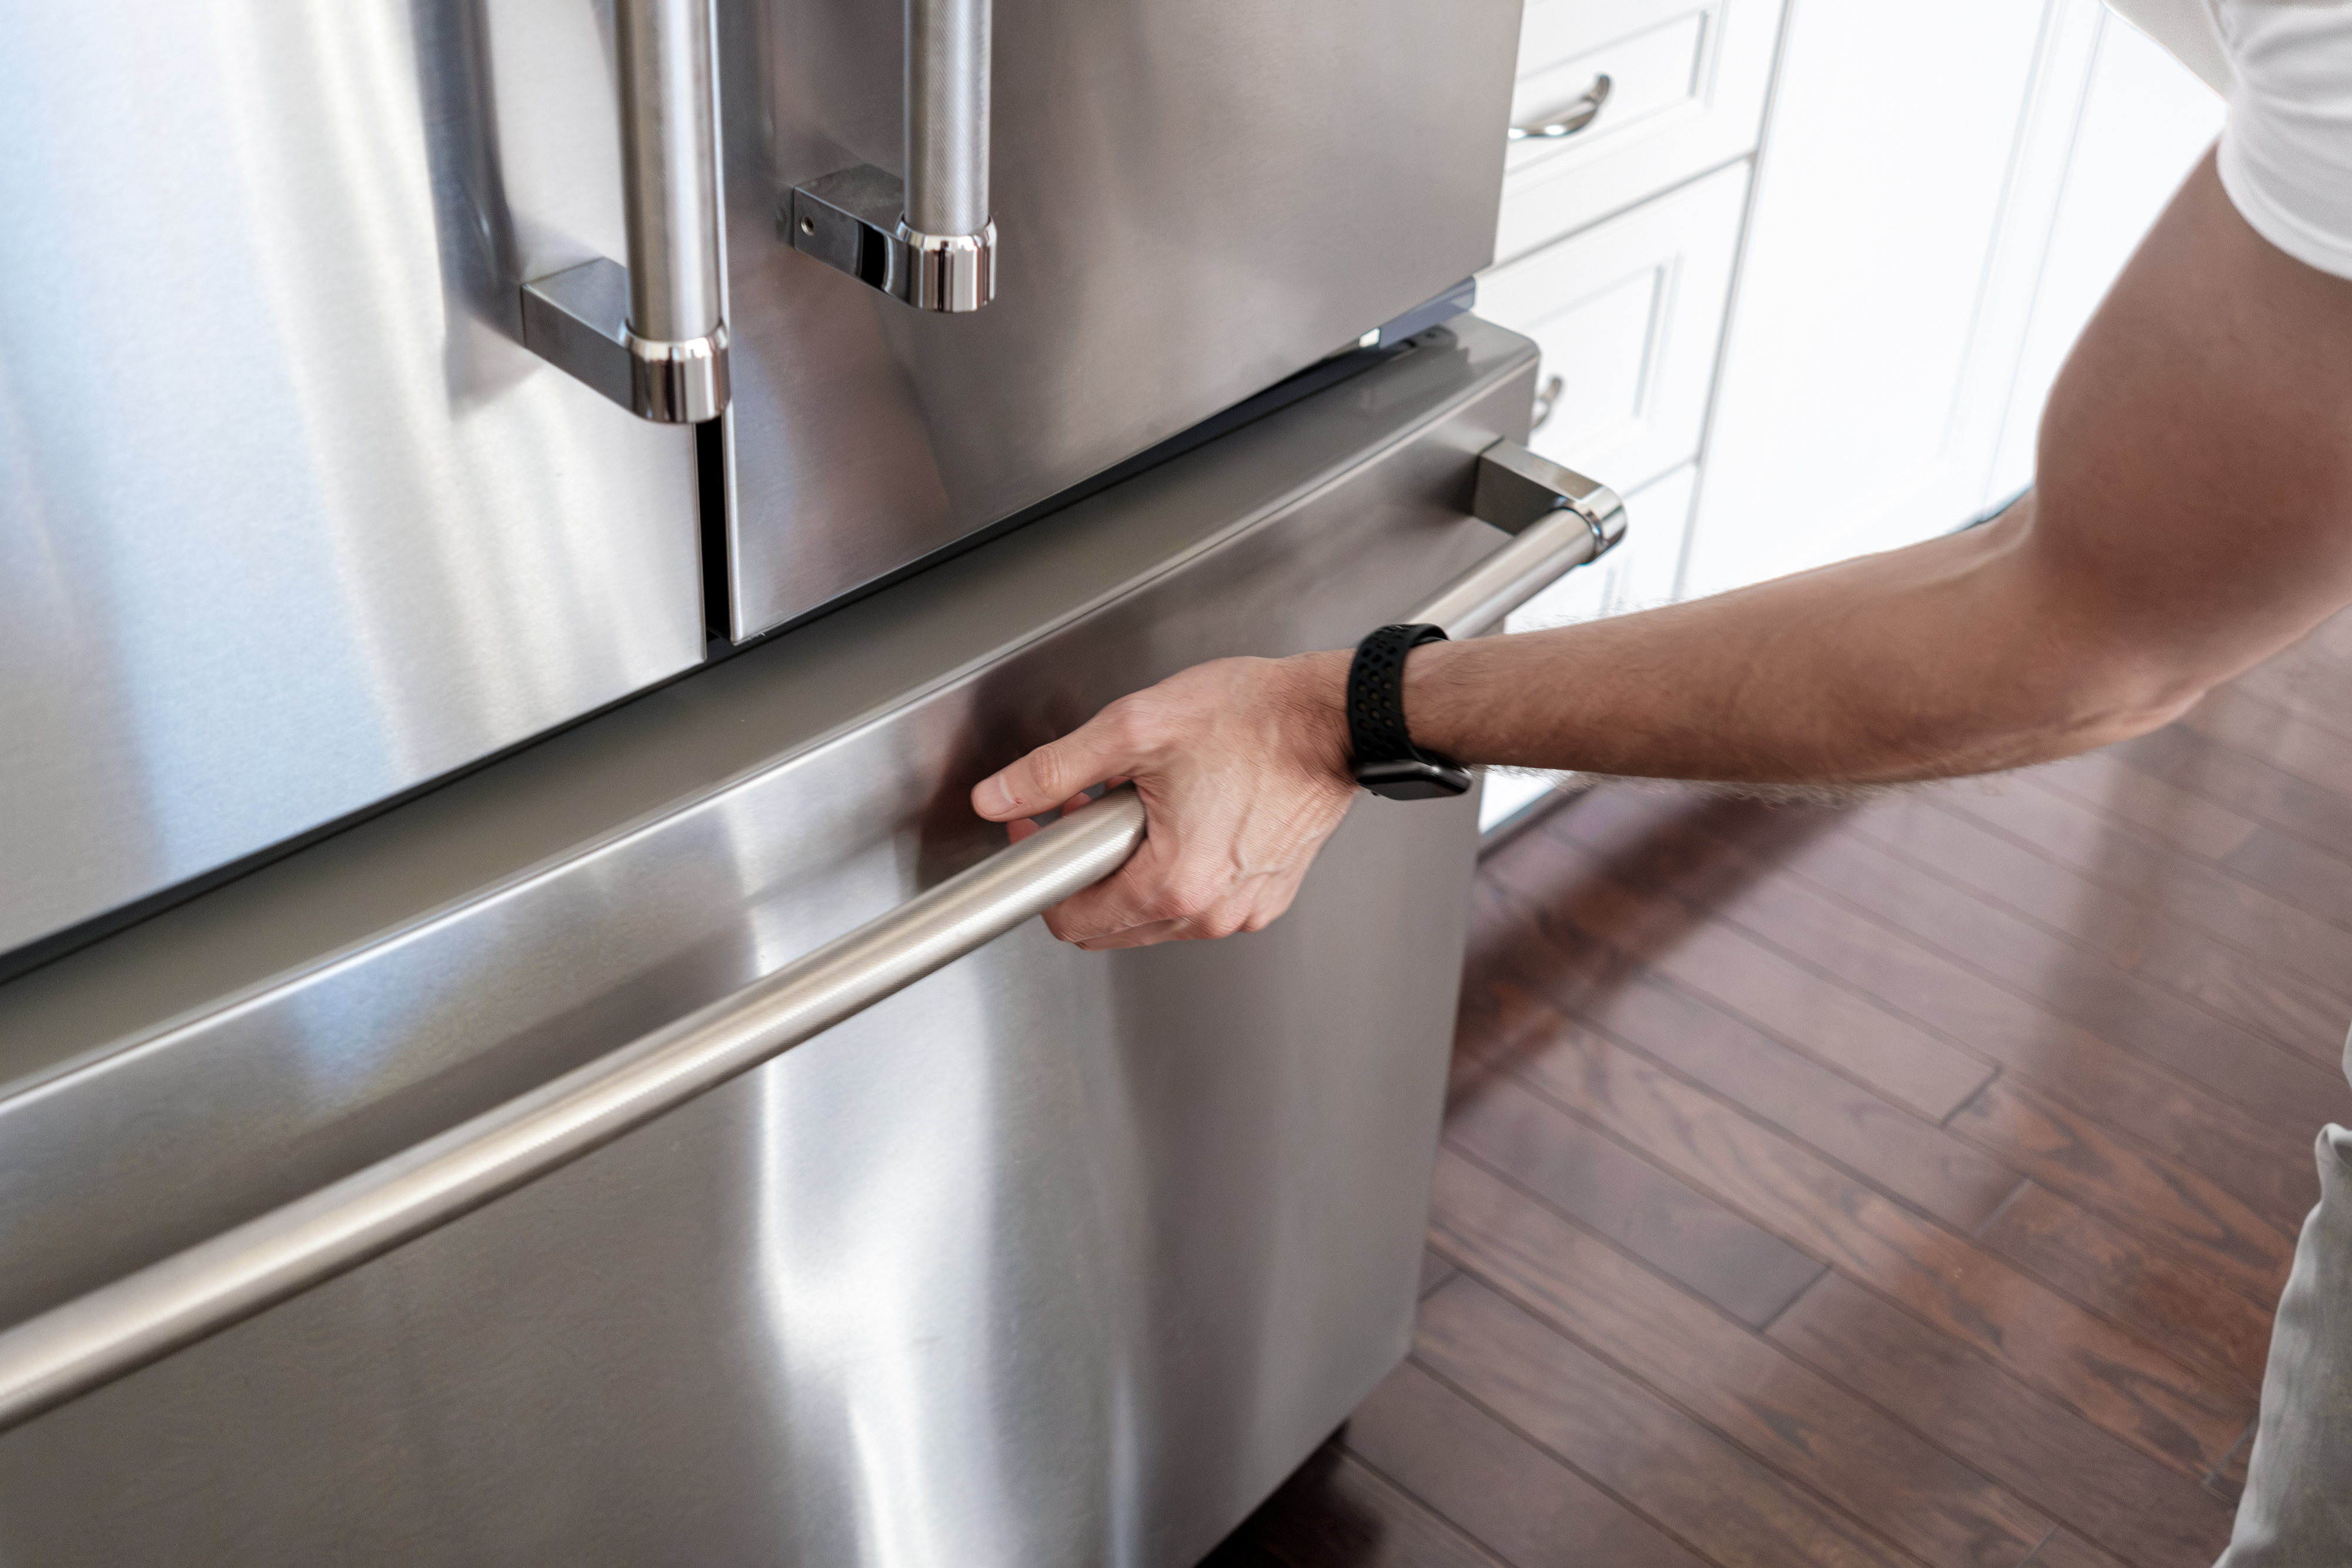 Person opening a stainless steel refrigerator door